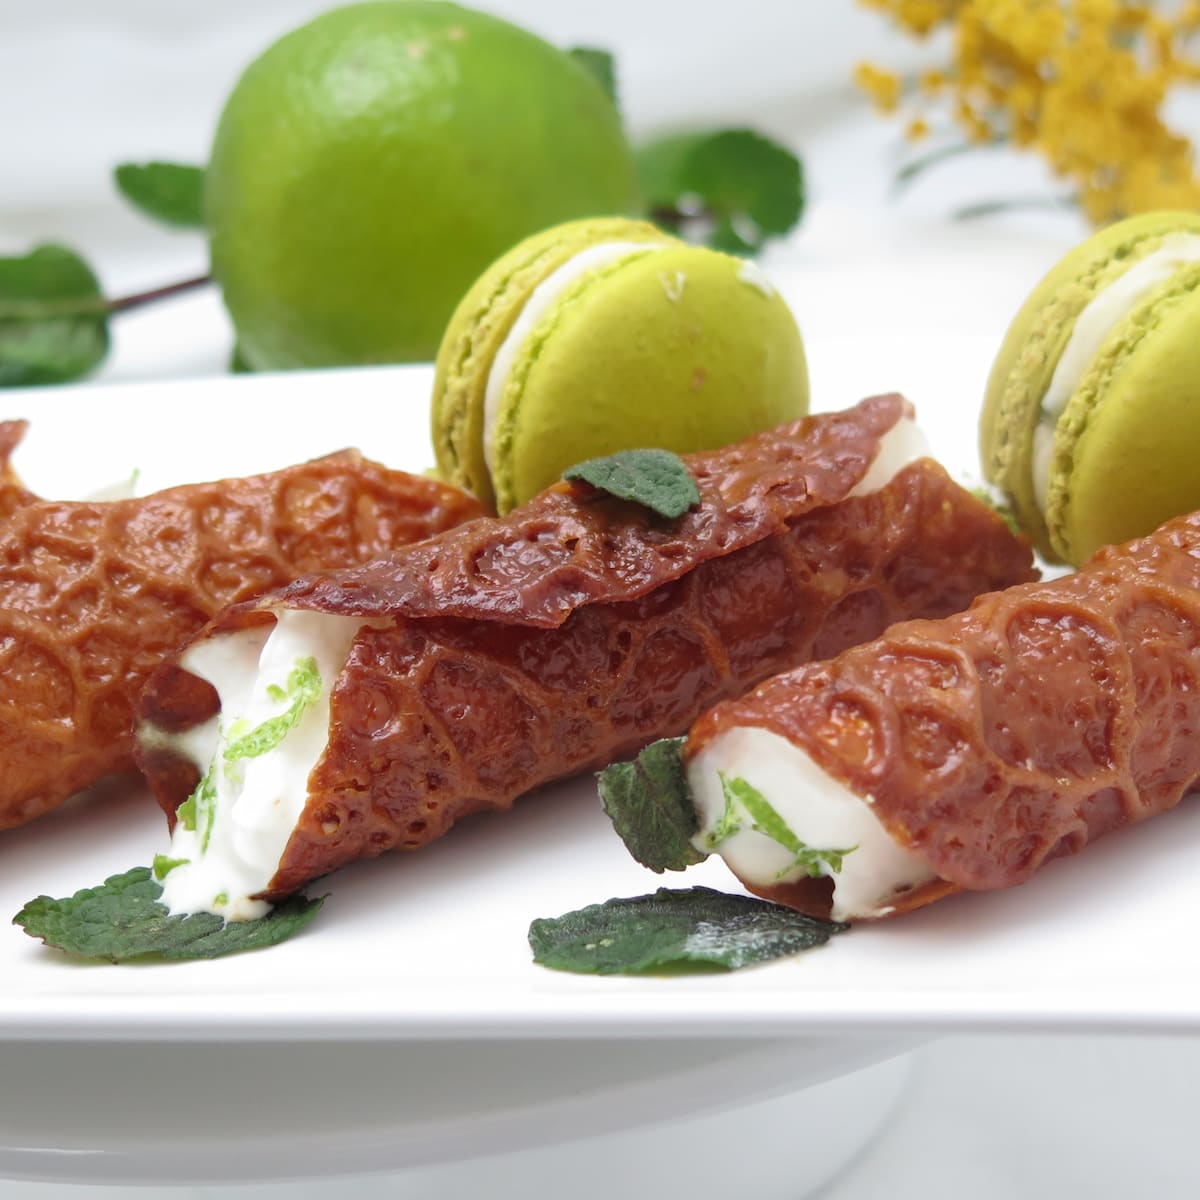 Tubes of brandy snaps filled with whipped cream, mint, lime and rum